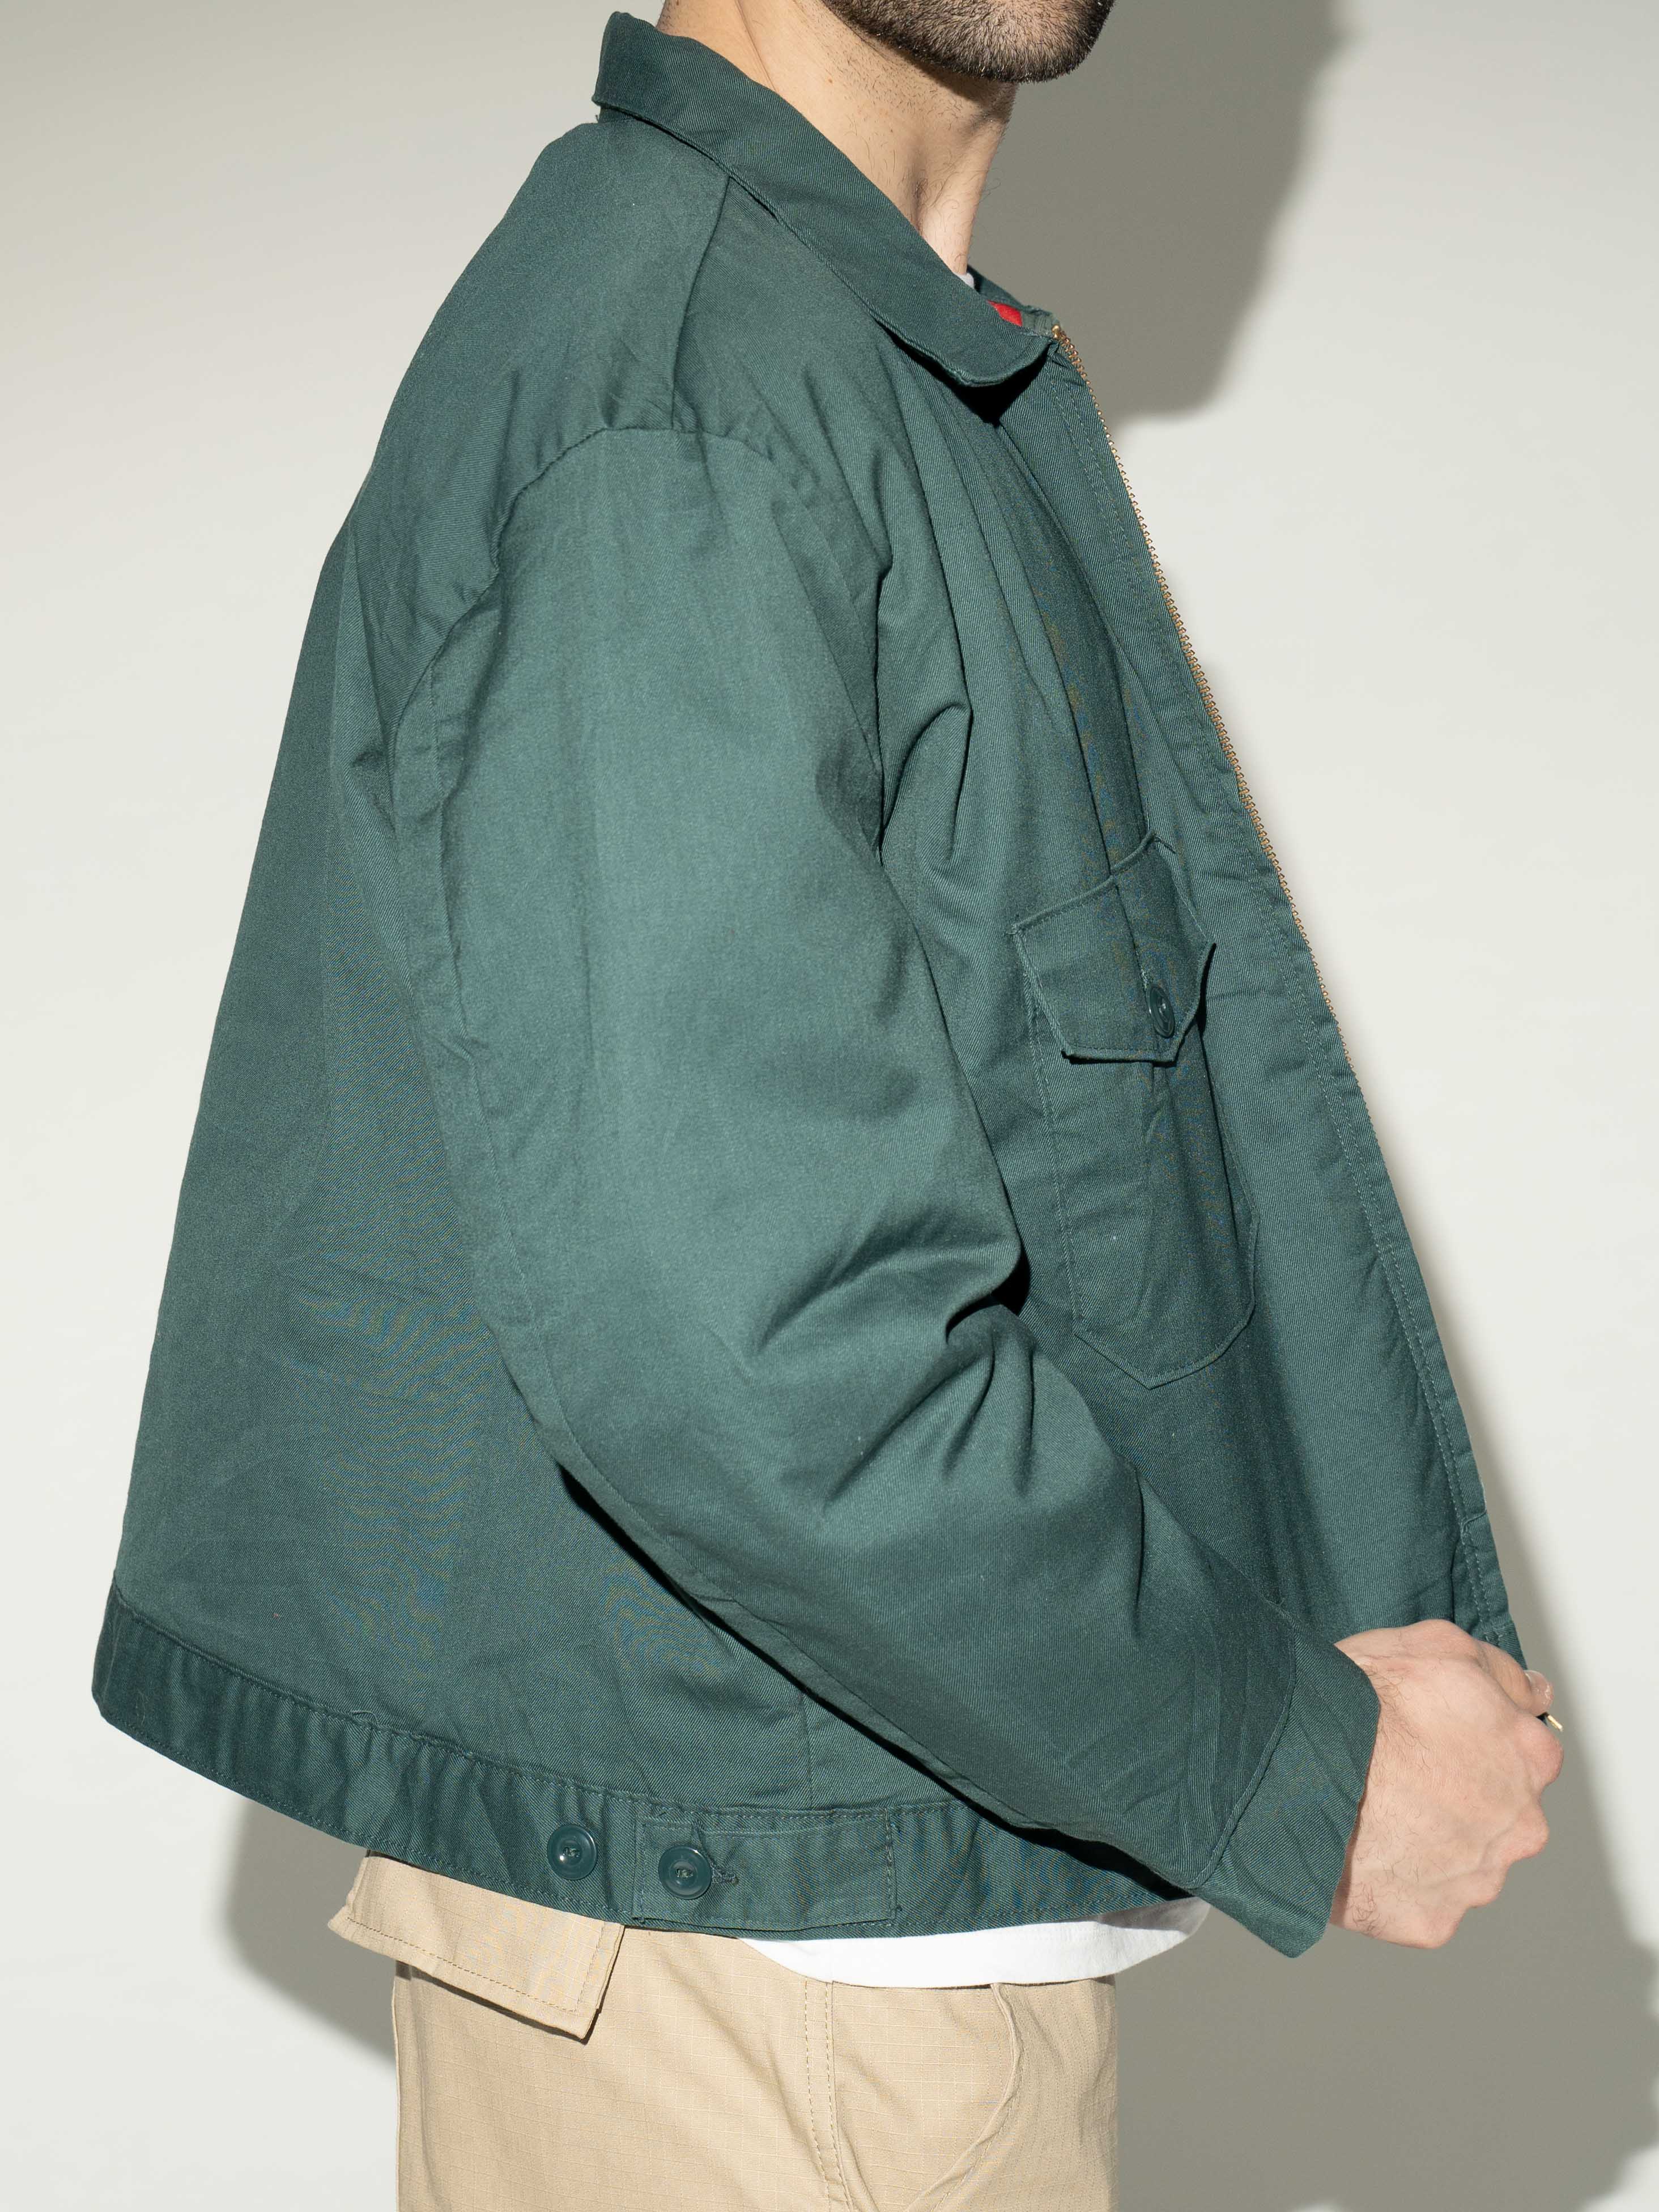 GREEN JACKET FROM THE 80S